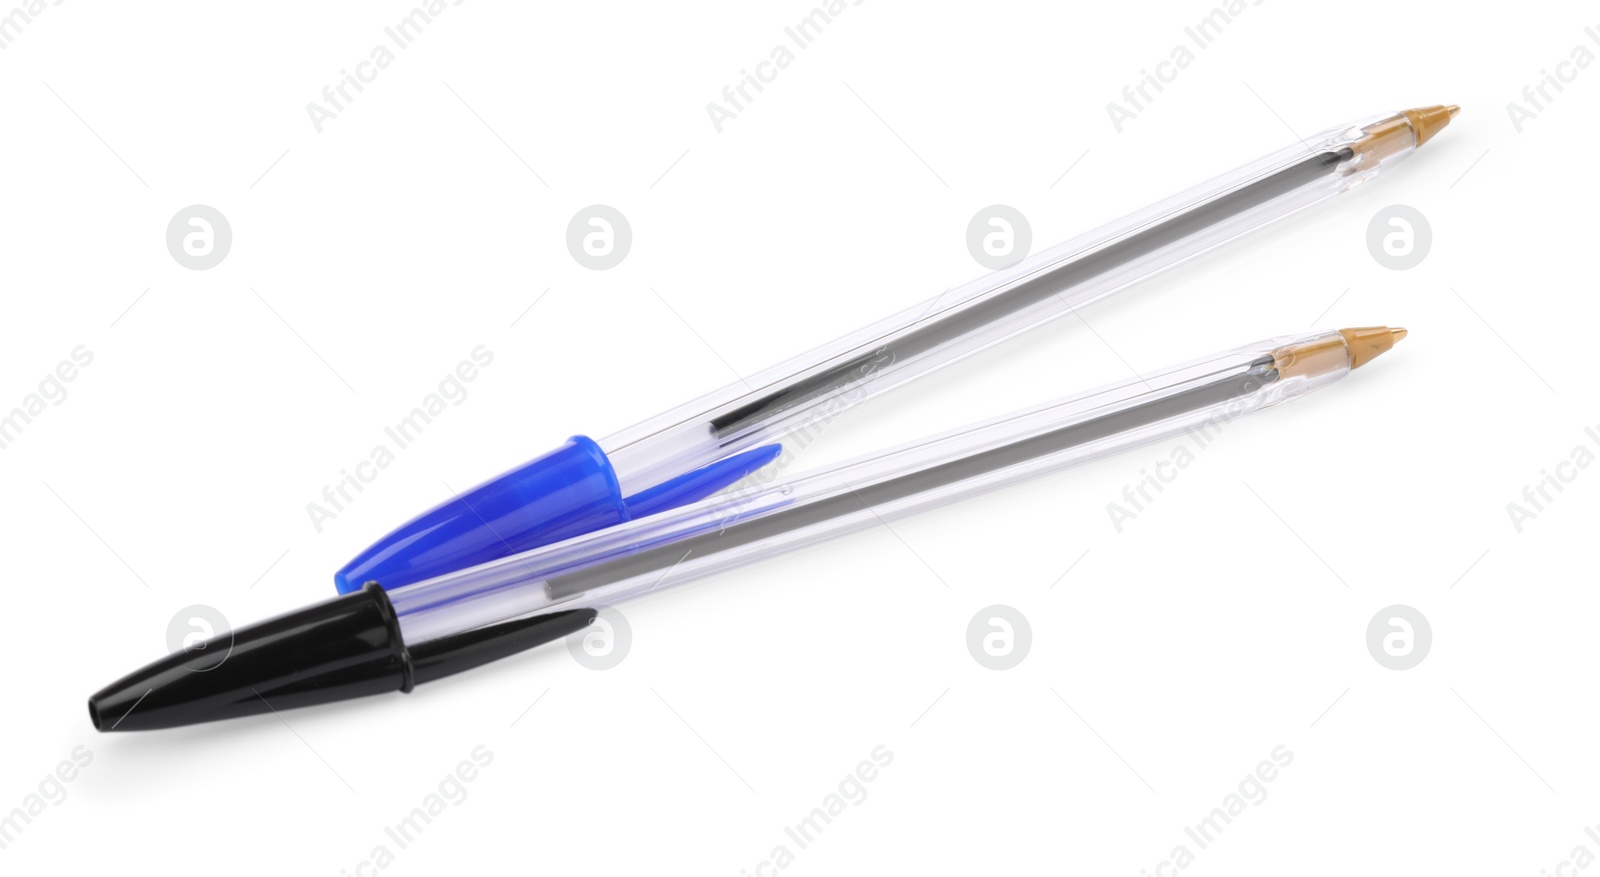 Photo of New black and blue pens isolated on white